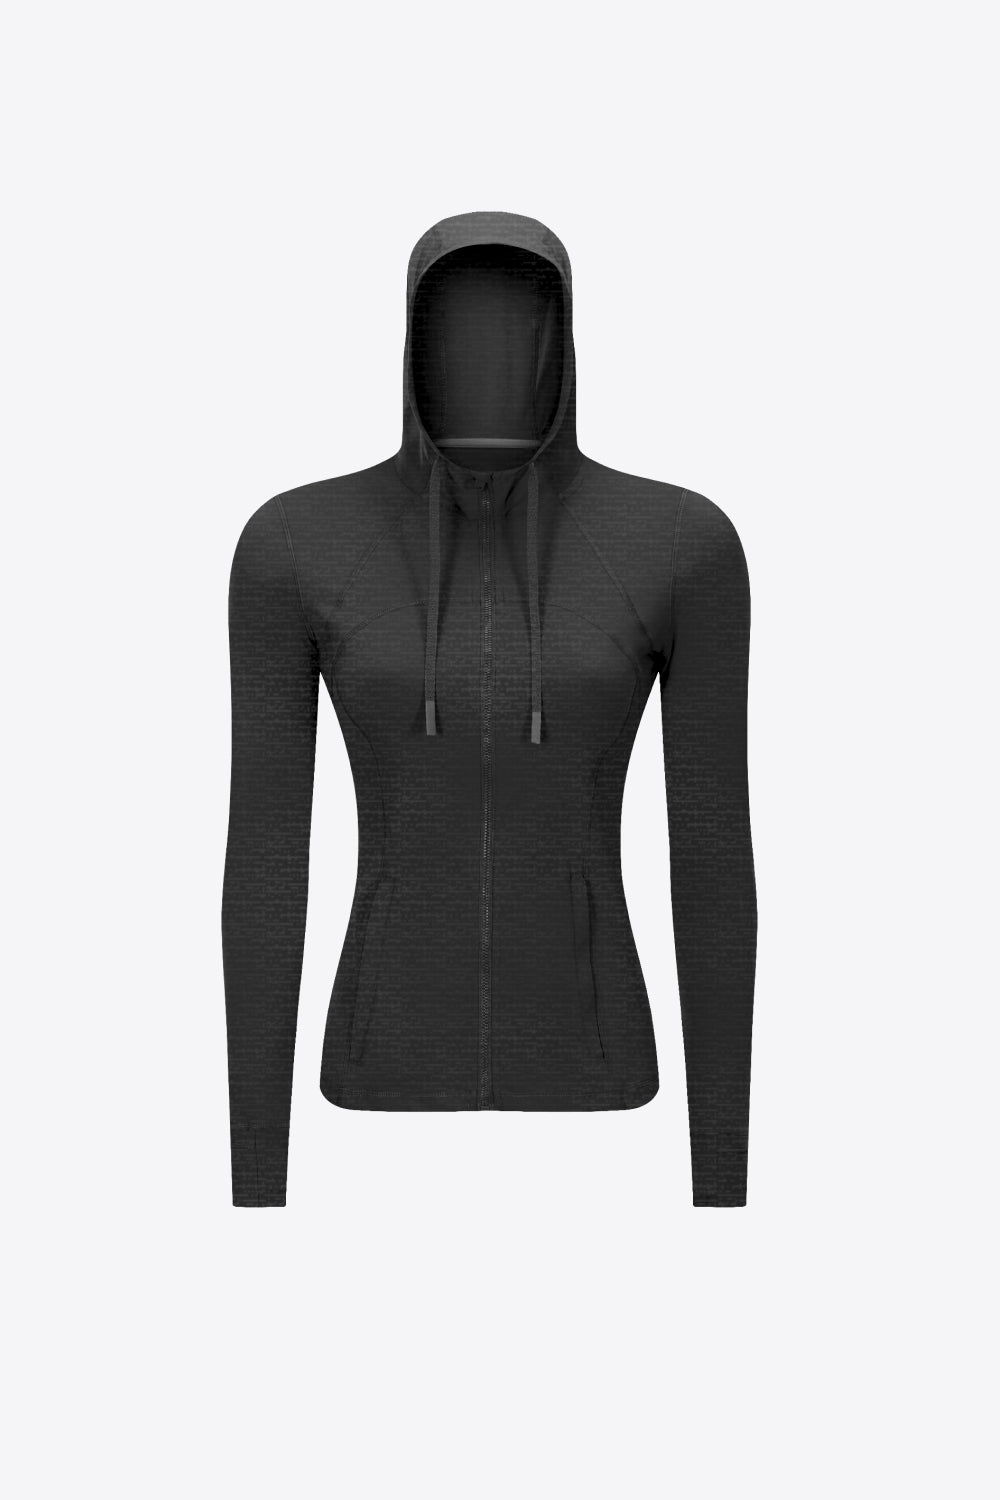 Women’s Drawstring Detail Zip Up Sports Jacket with Pockets